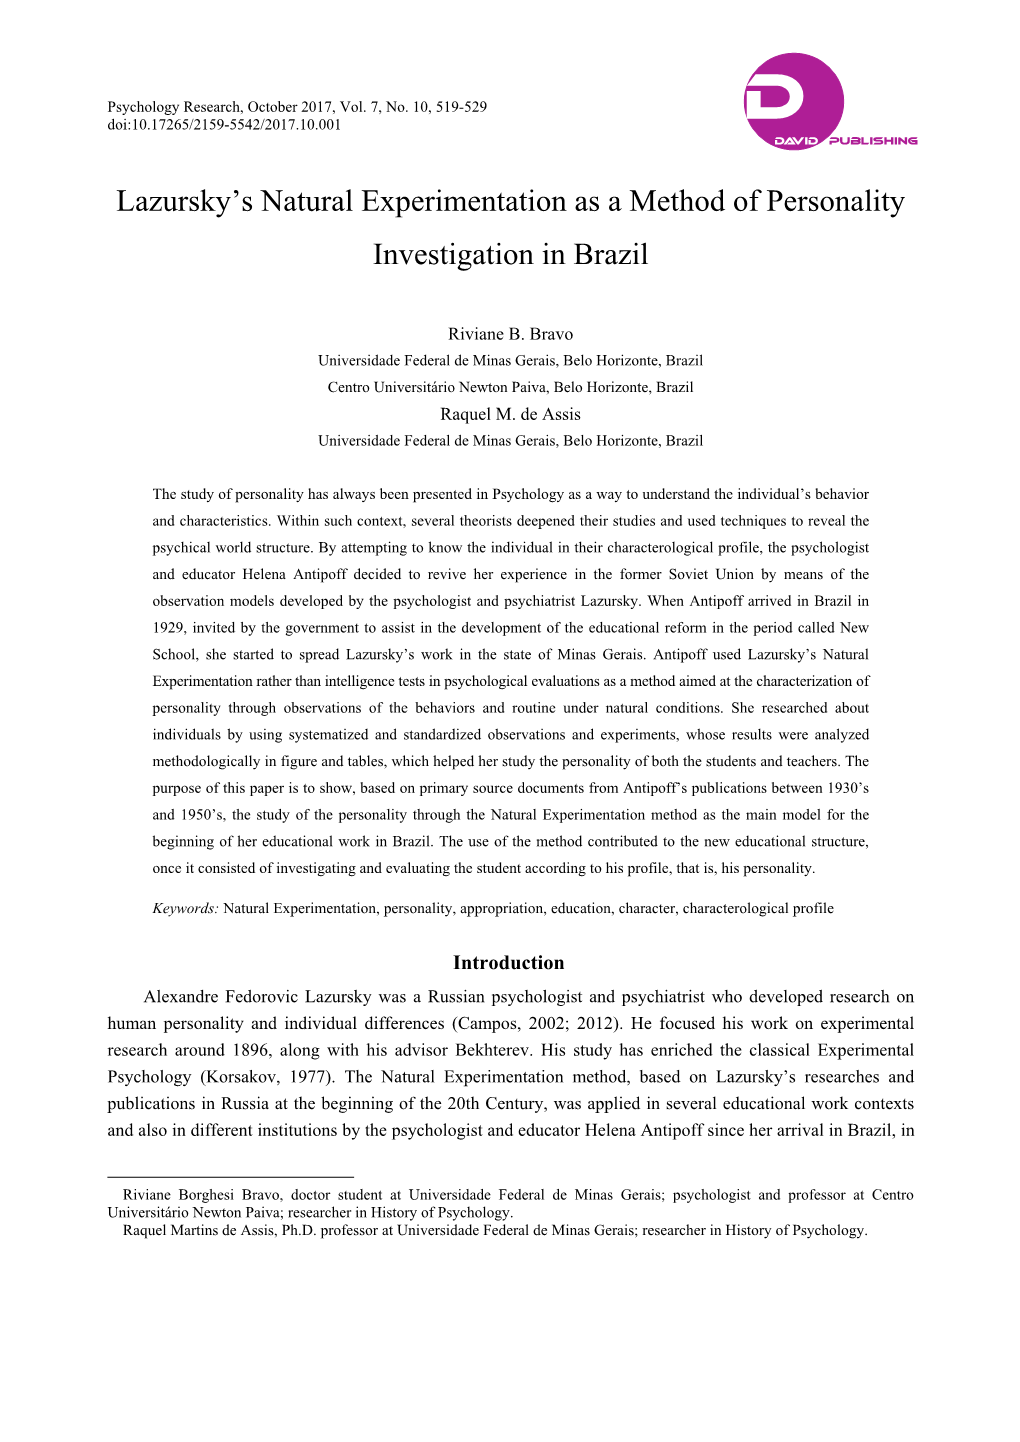 Lazursky's Natural Experimentation As a Method of Personality Investigation in Brazil